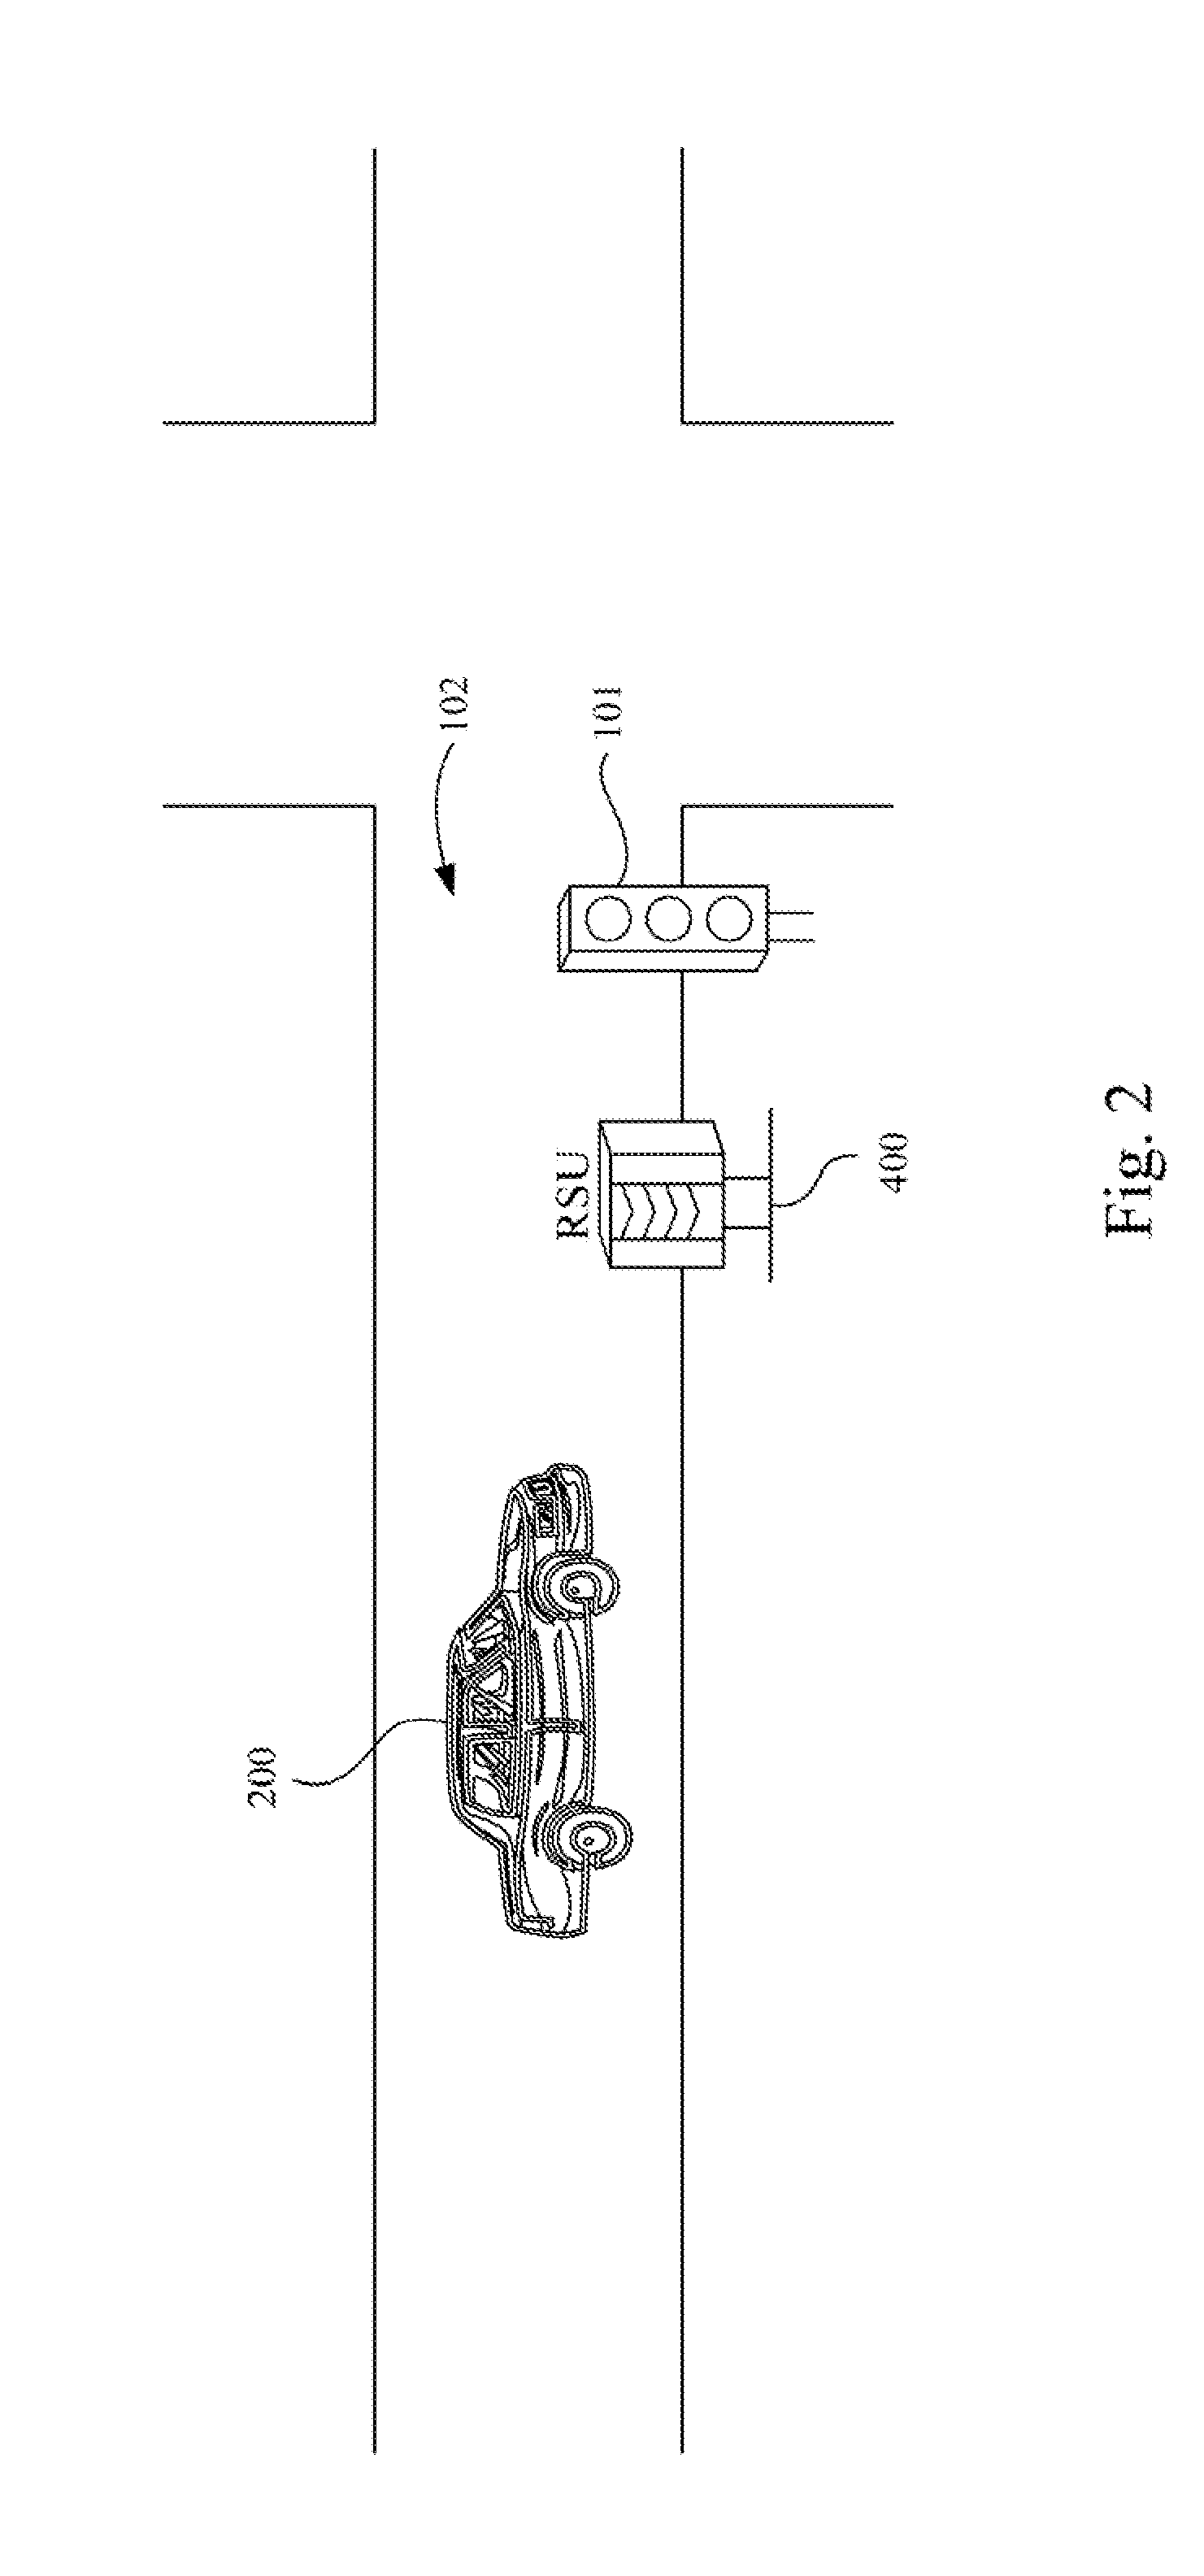 Driving assisting system, method and computer readable storage medium for storing thereof